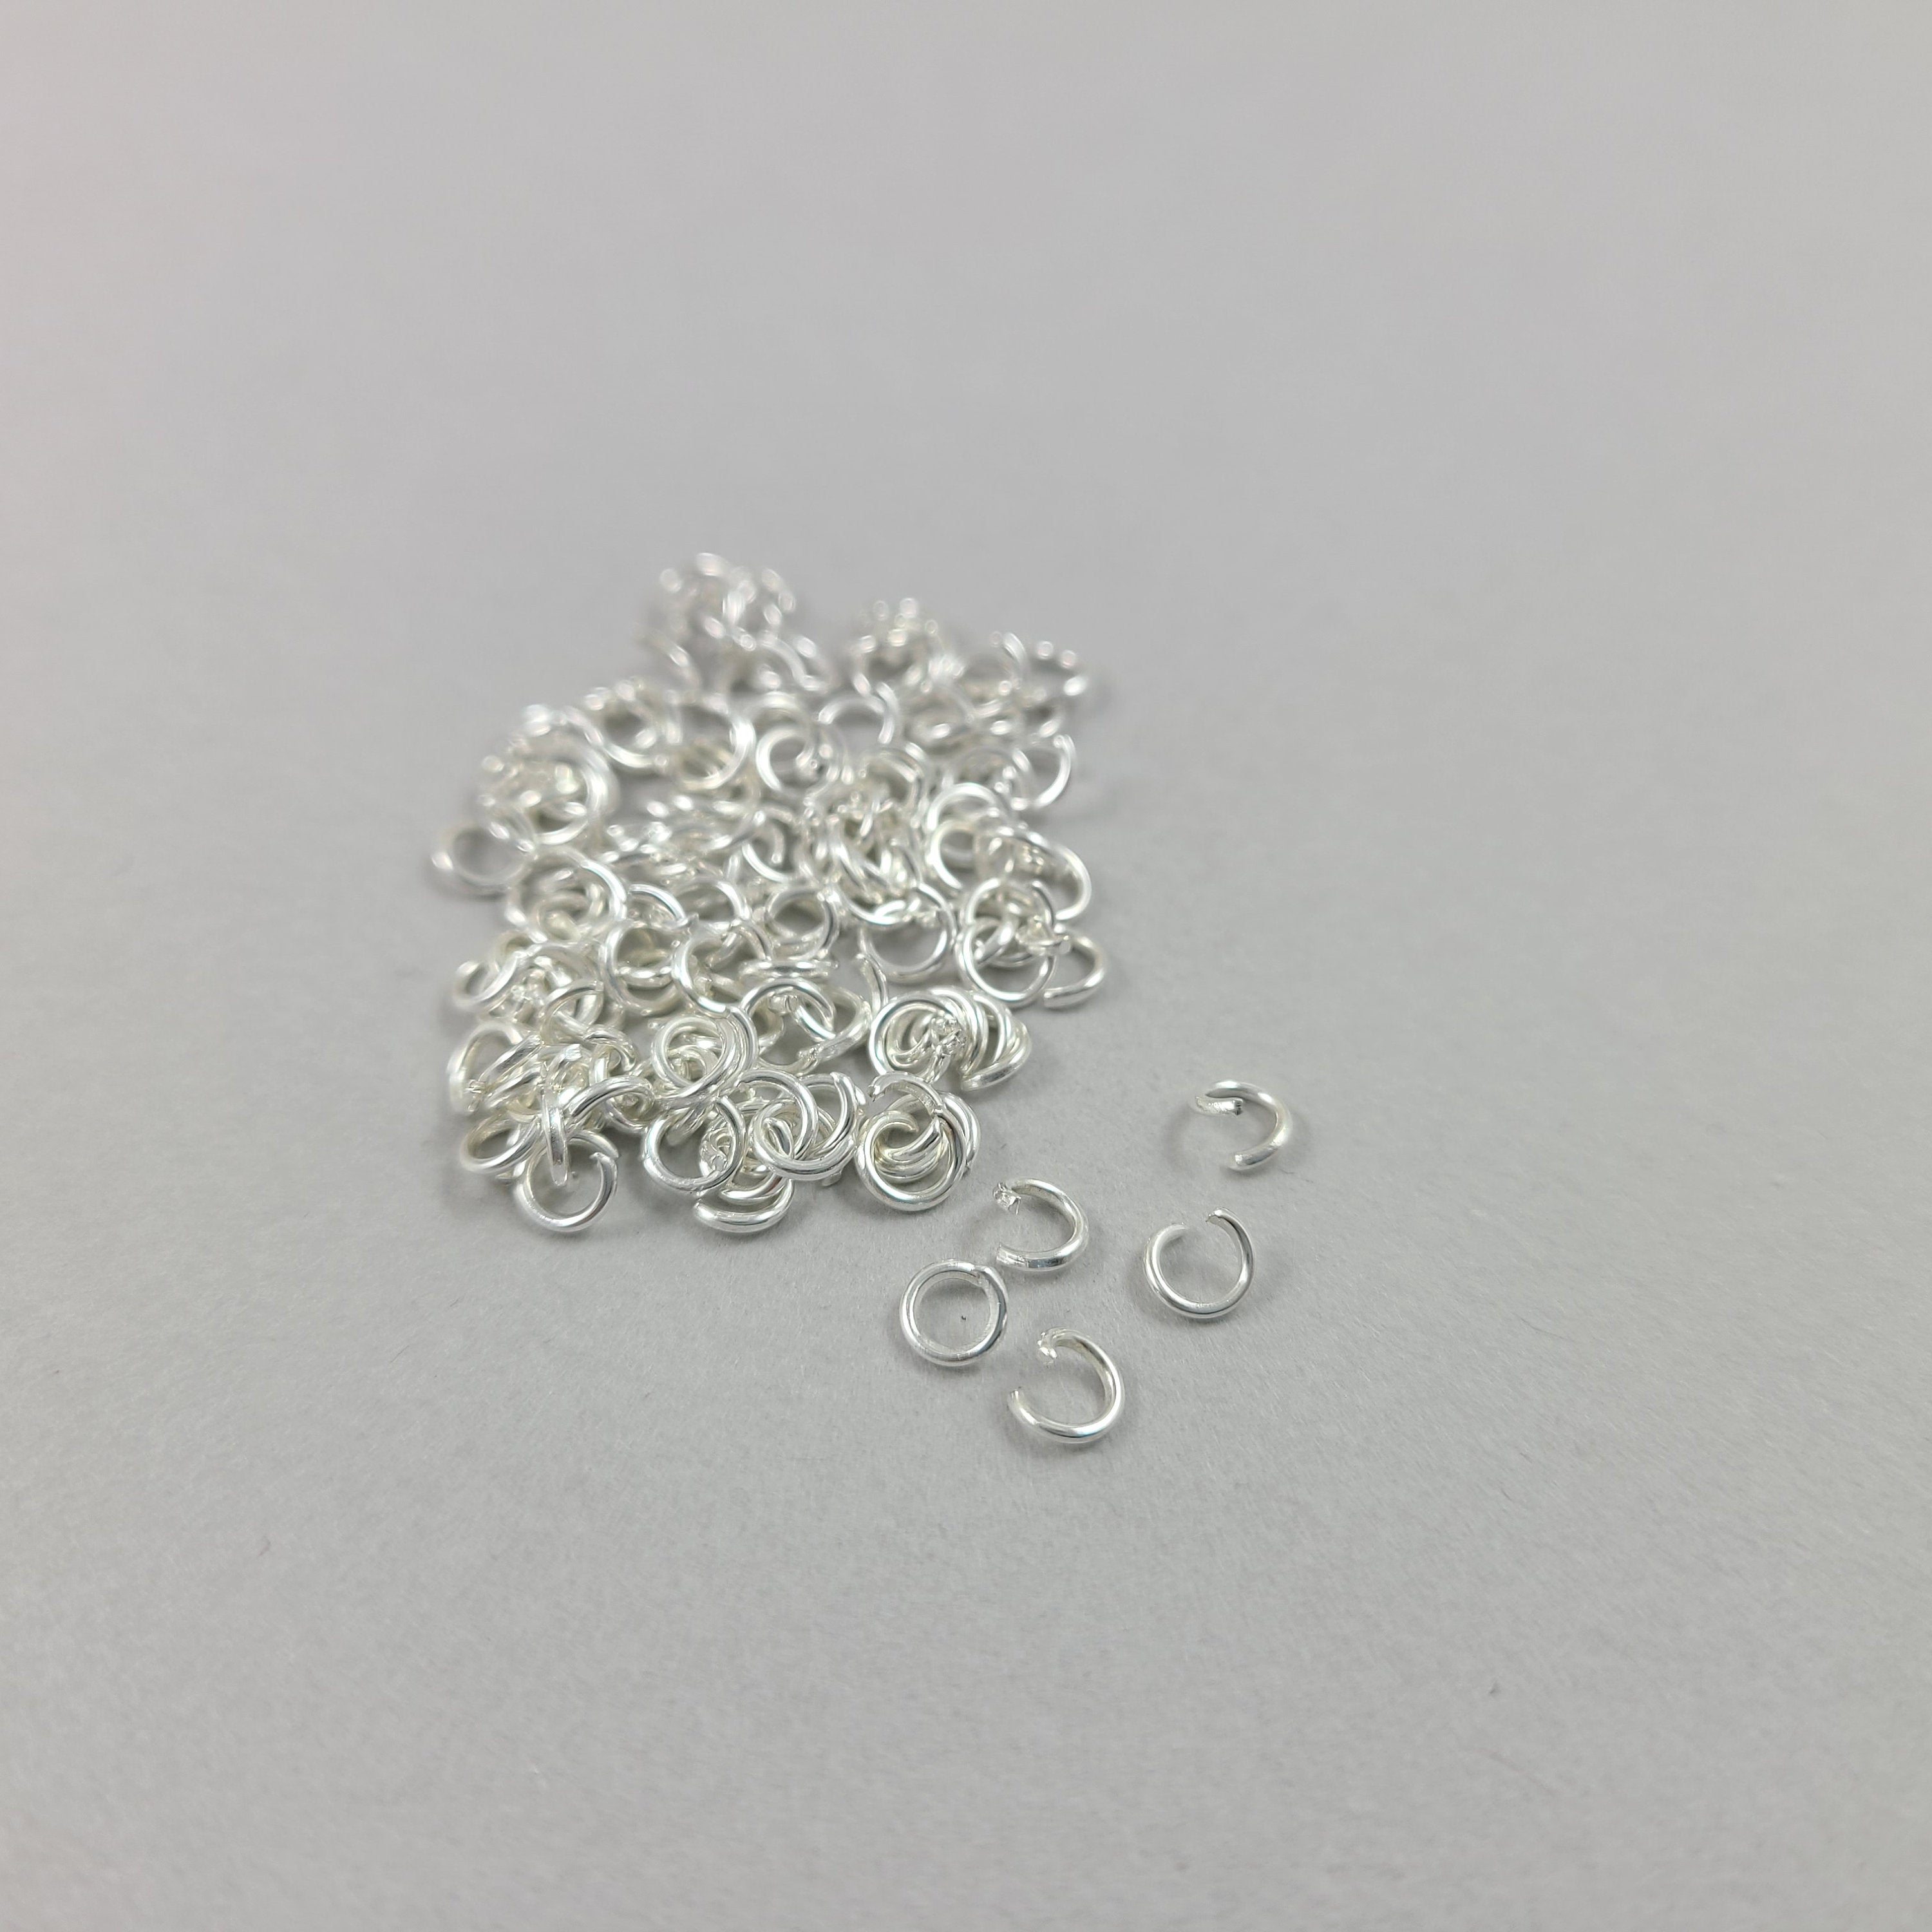 Hypoallergenic silver jump rings, 4mm, 5mm, 6mm, 7mm, 8mm, Bulk jewelry findings, Nickel free, lead free and cadmium free